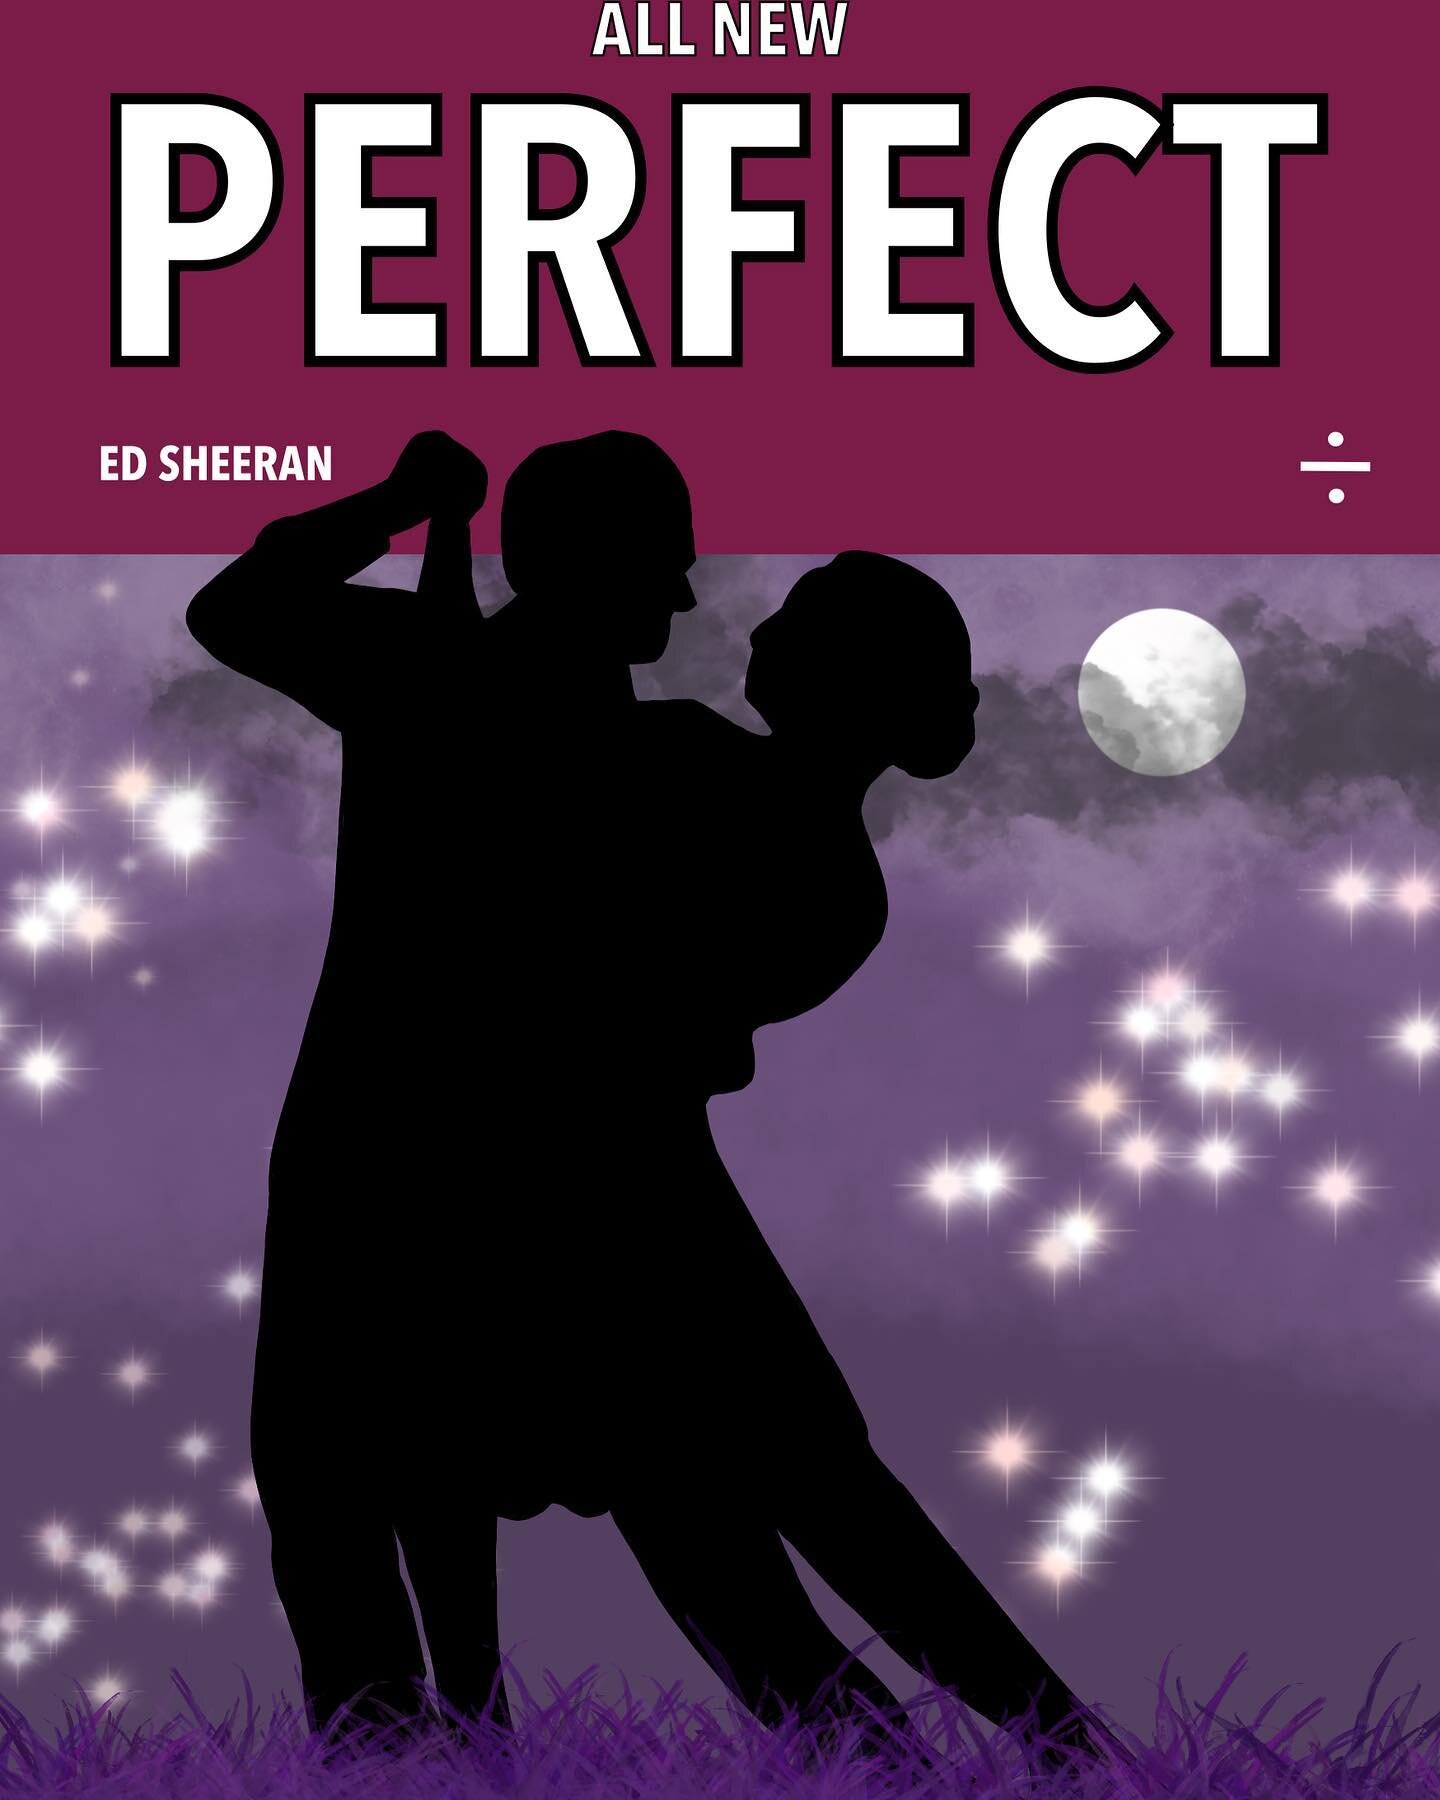 Another commissioned piece inspired by a song as #comic covers - this one is inspired by Perfect by Ed Sheeran! @teddysphotos

#edsheeran #perfect #divide #dancing #moonlight #dance #song #comic #comicart #comiccover #covers #illustration #digitalart